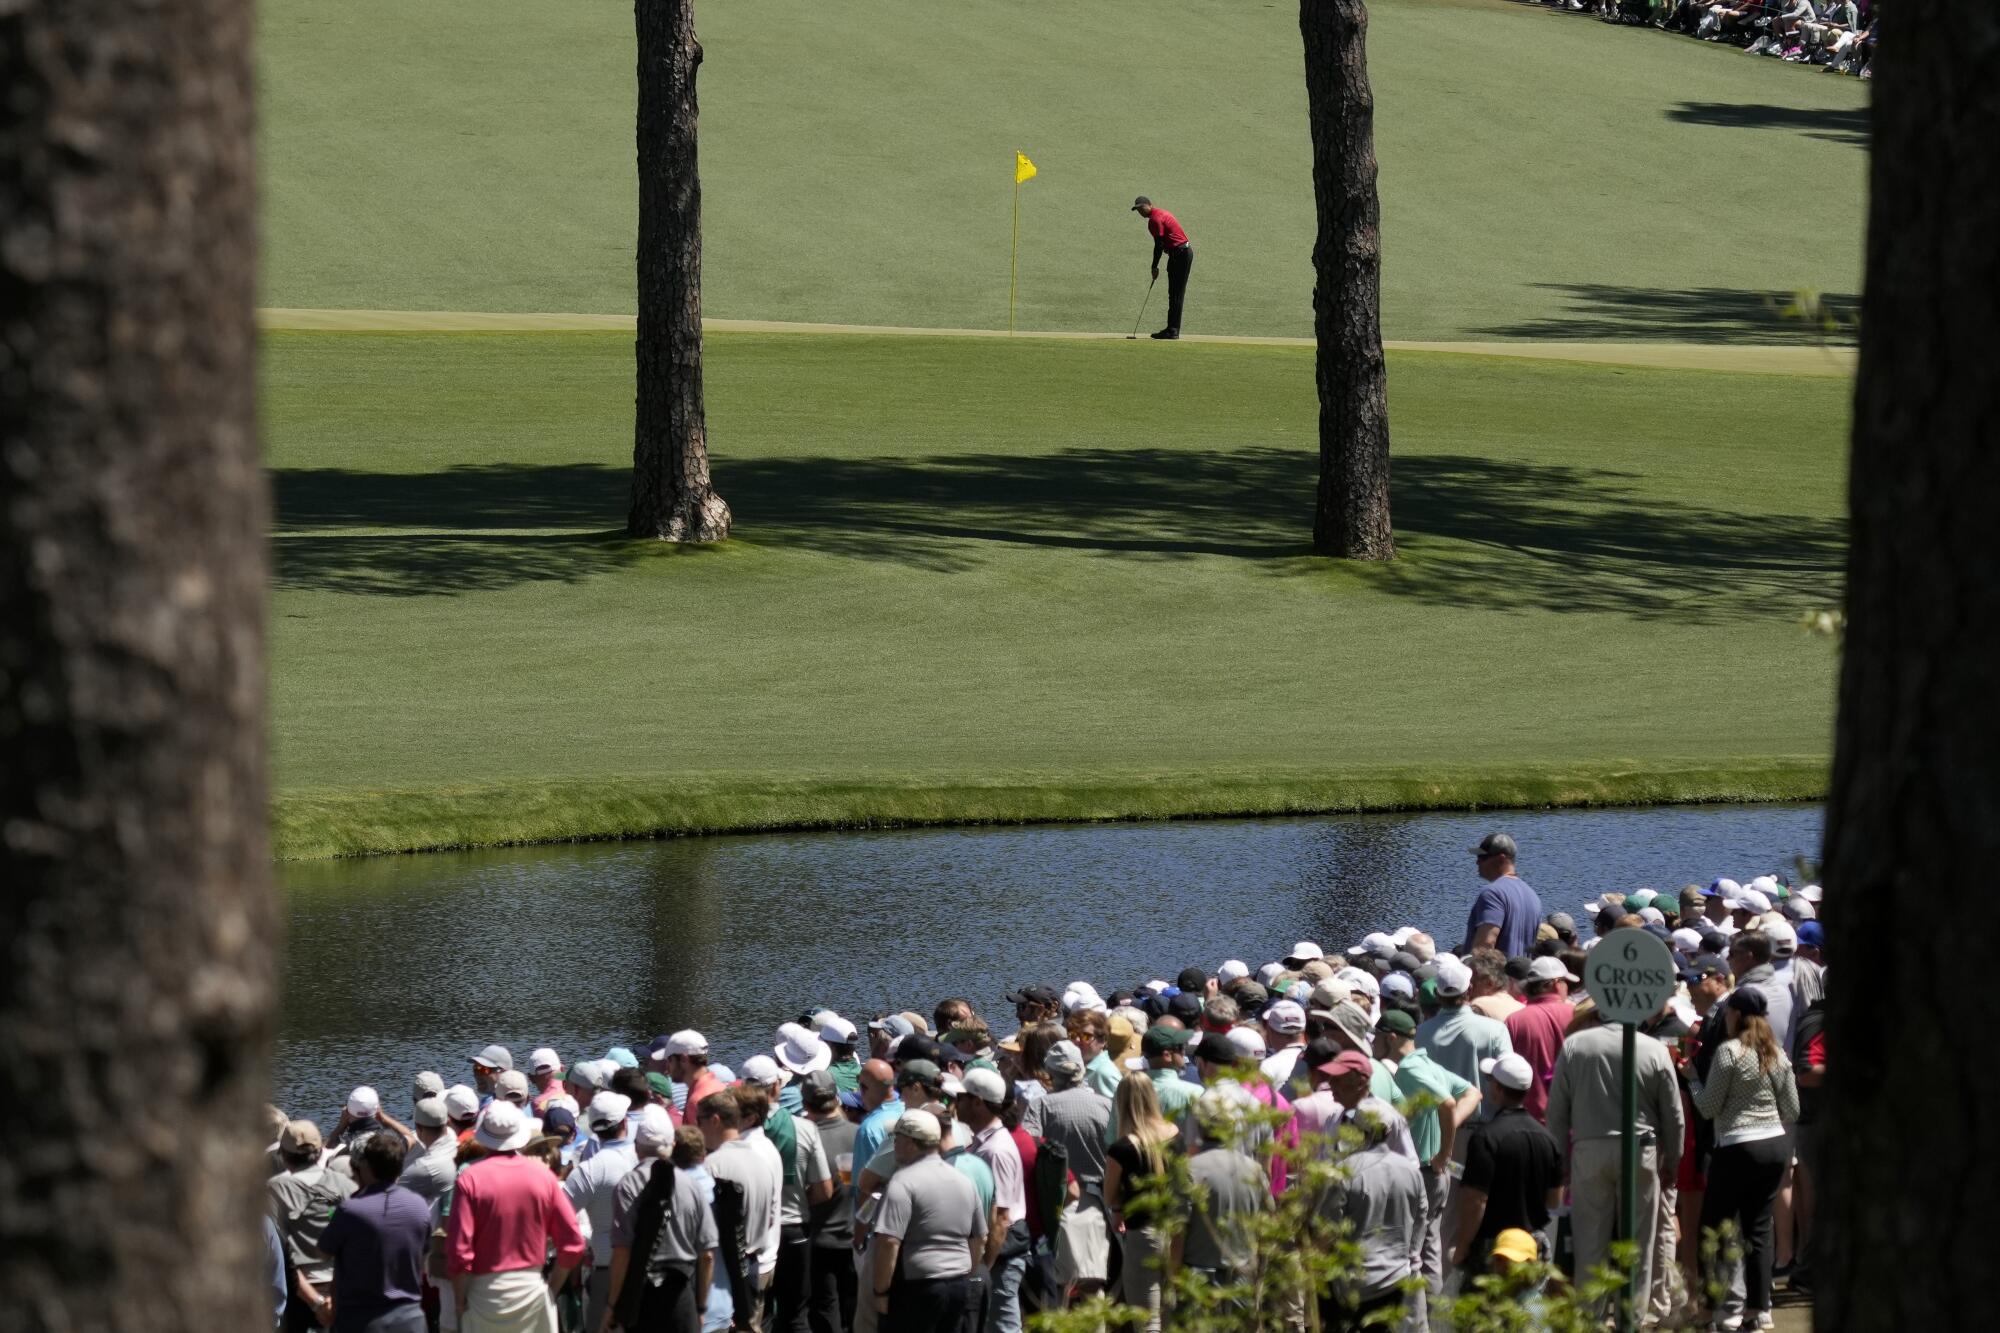 Tiger Woods putts on the 15th green during the final round.